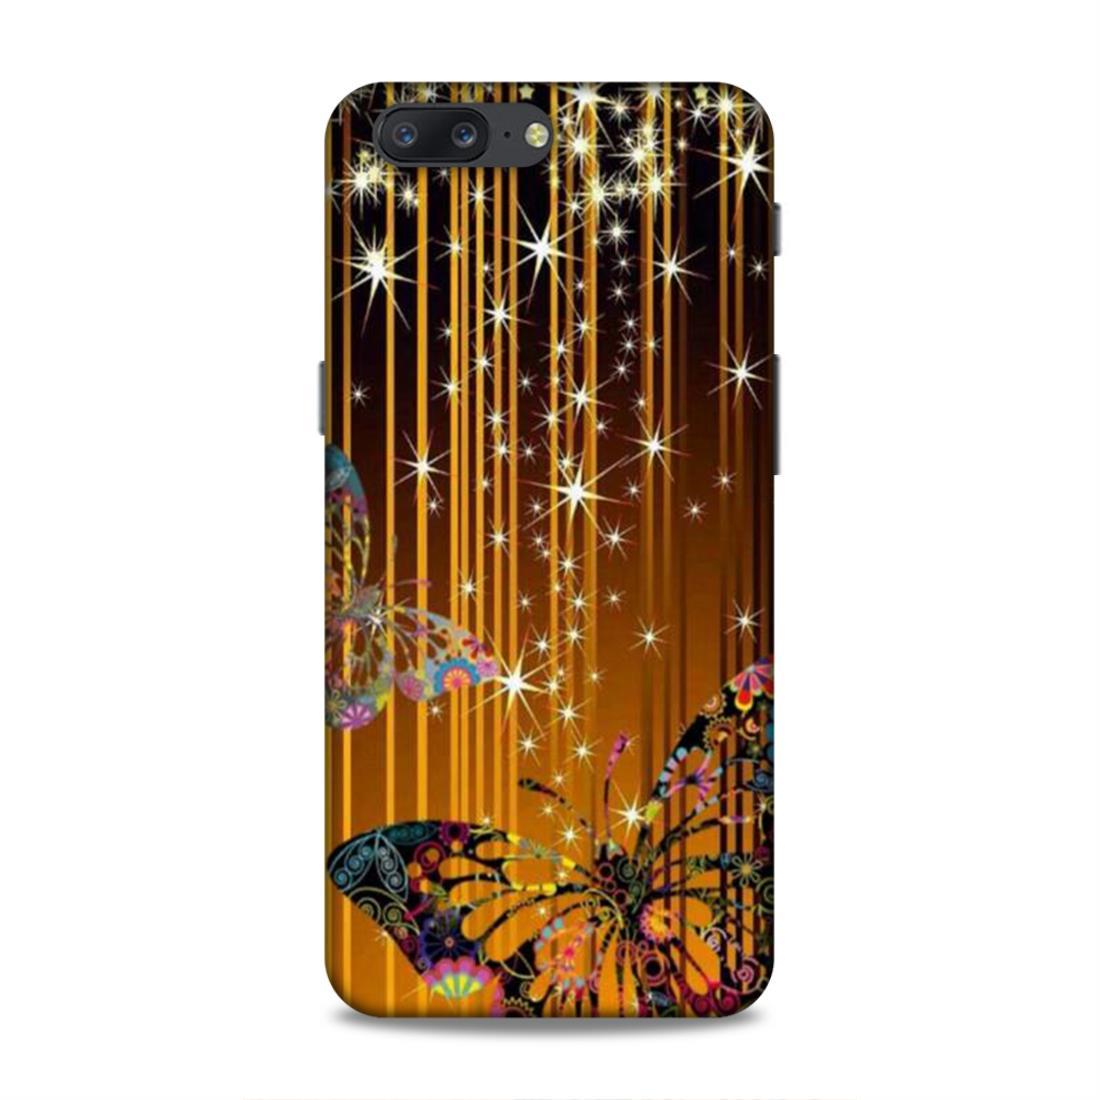 Fancy Star Butterfly OnePlus 5 Mobile Cover Case